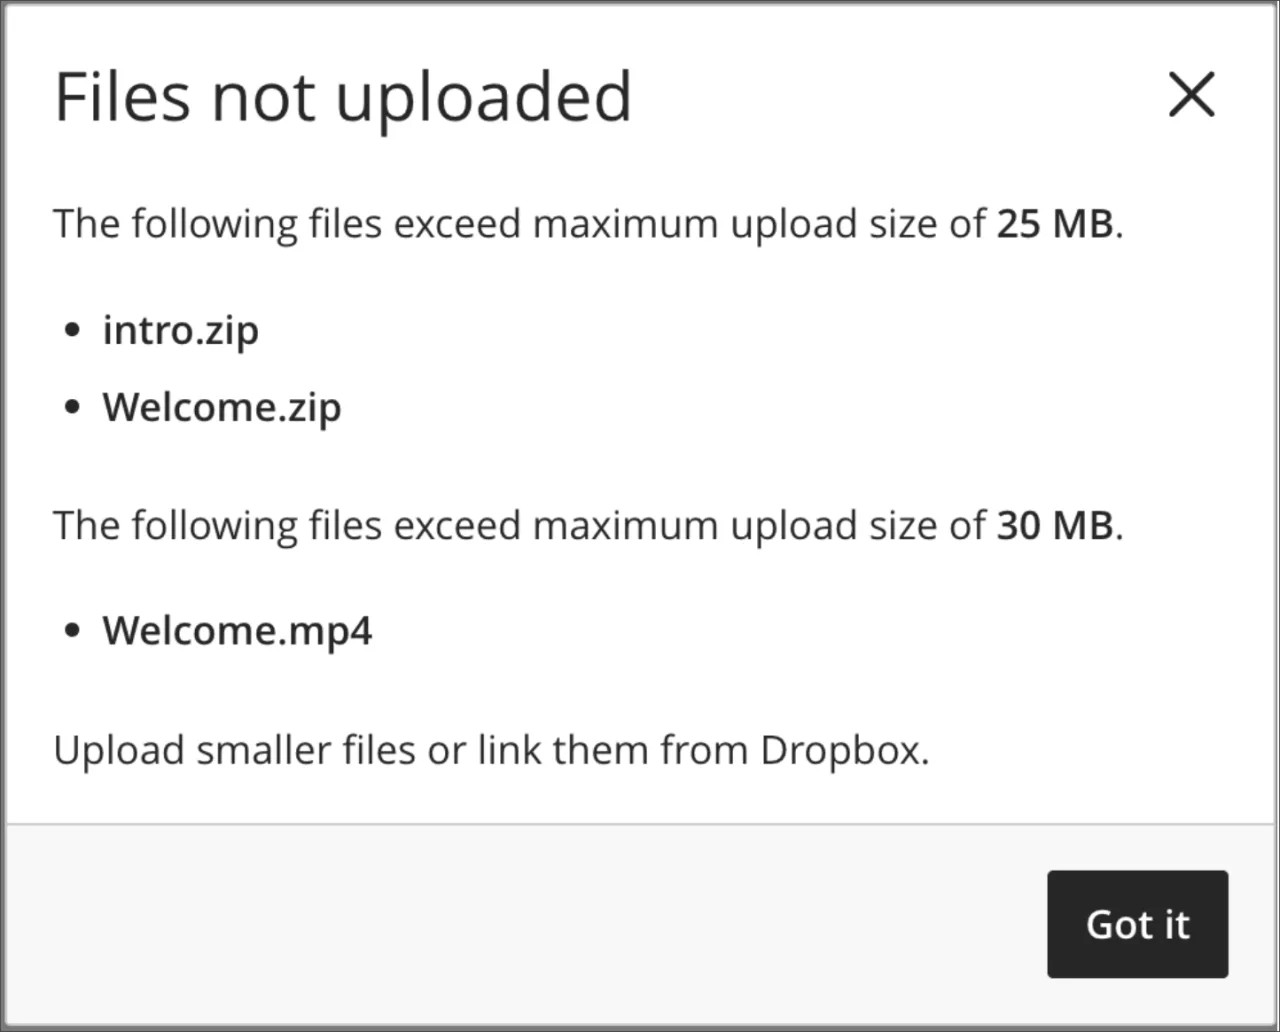 A message informs the user of any files that do not comply with the limit set by the institution